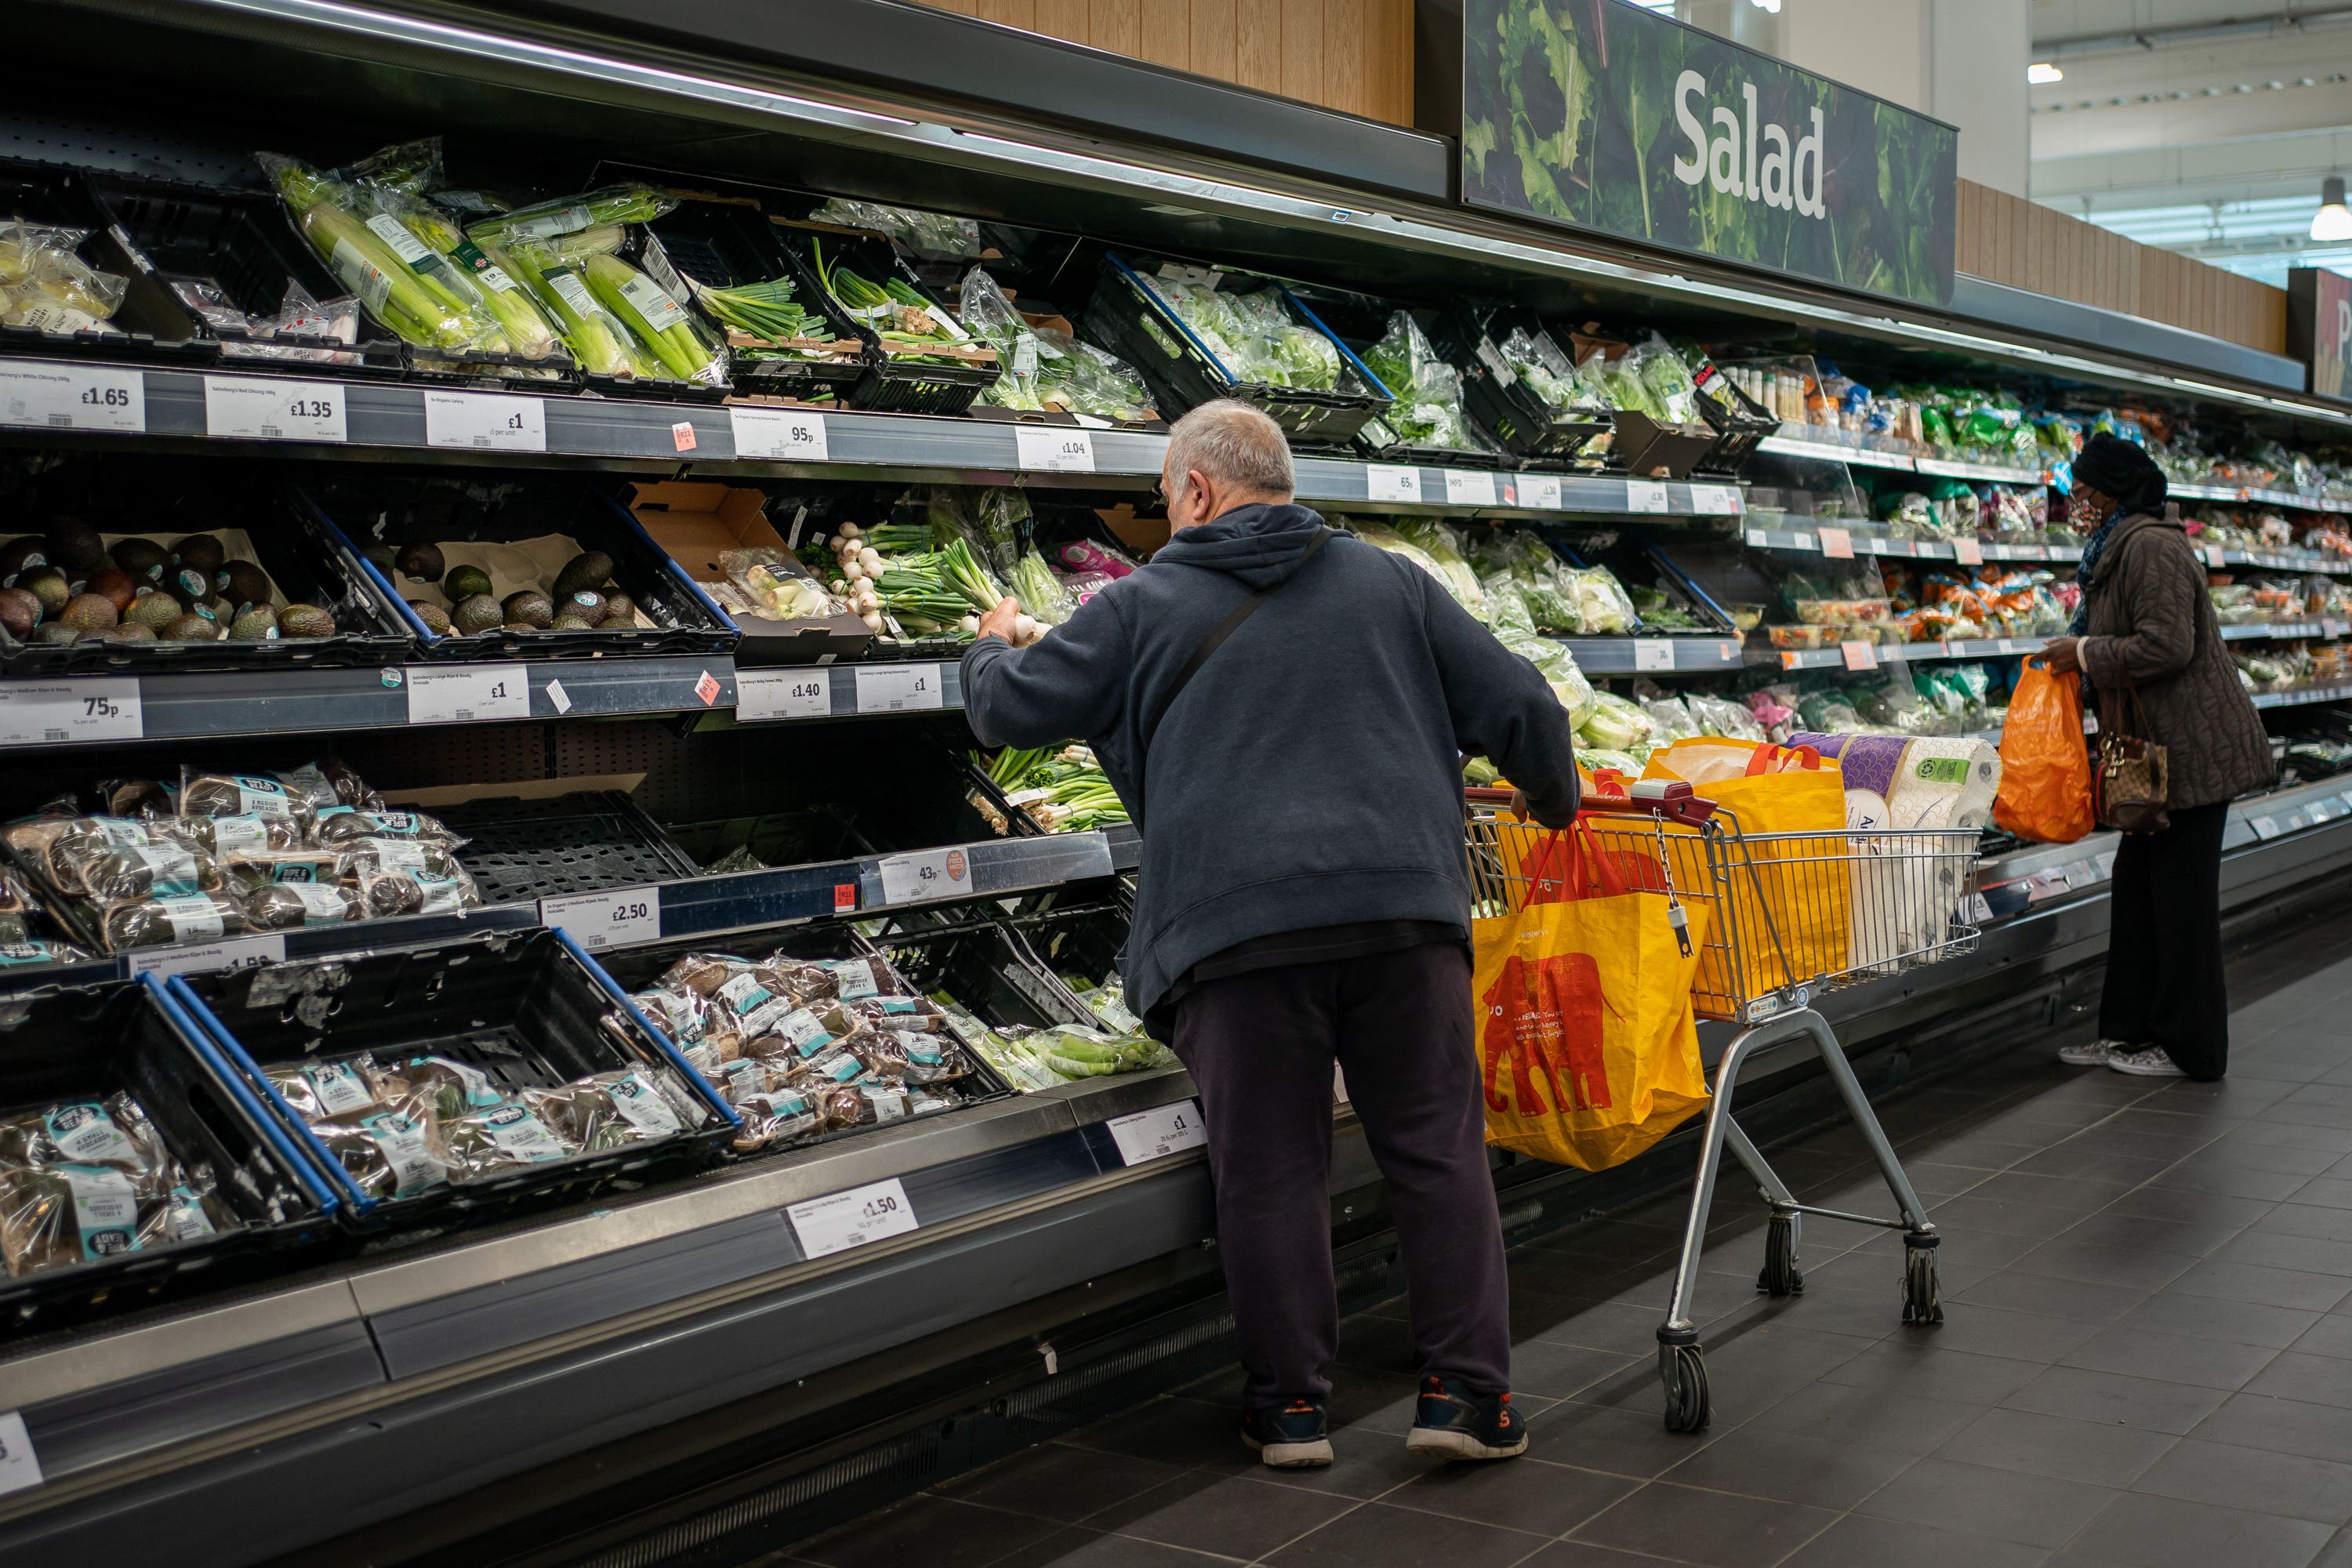 Food prices continue to rise as Britons struggle in the cost of living crisis